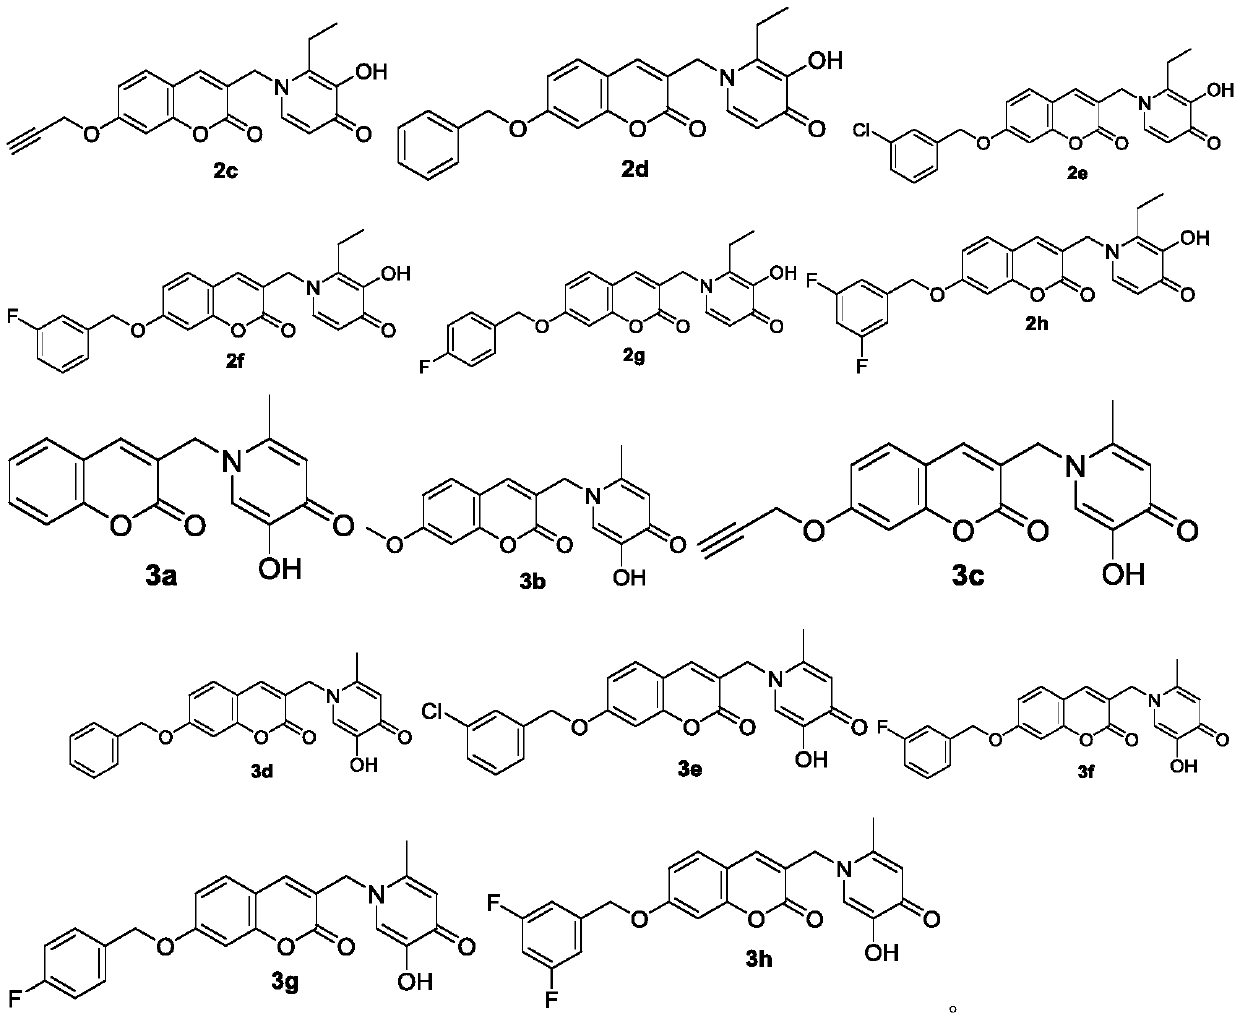 Coumarin heterozygous pyridone compounds having iron chelation and monoamine oxidase B inhibitory activity as well as preparation and application of compounds